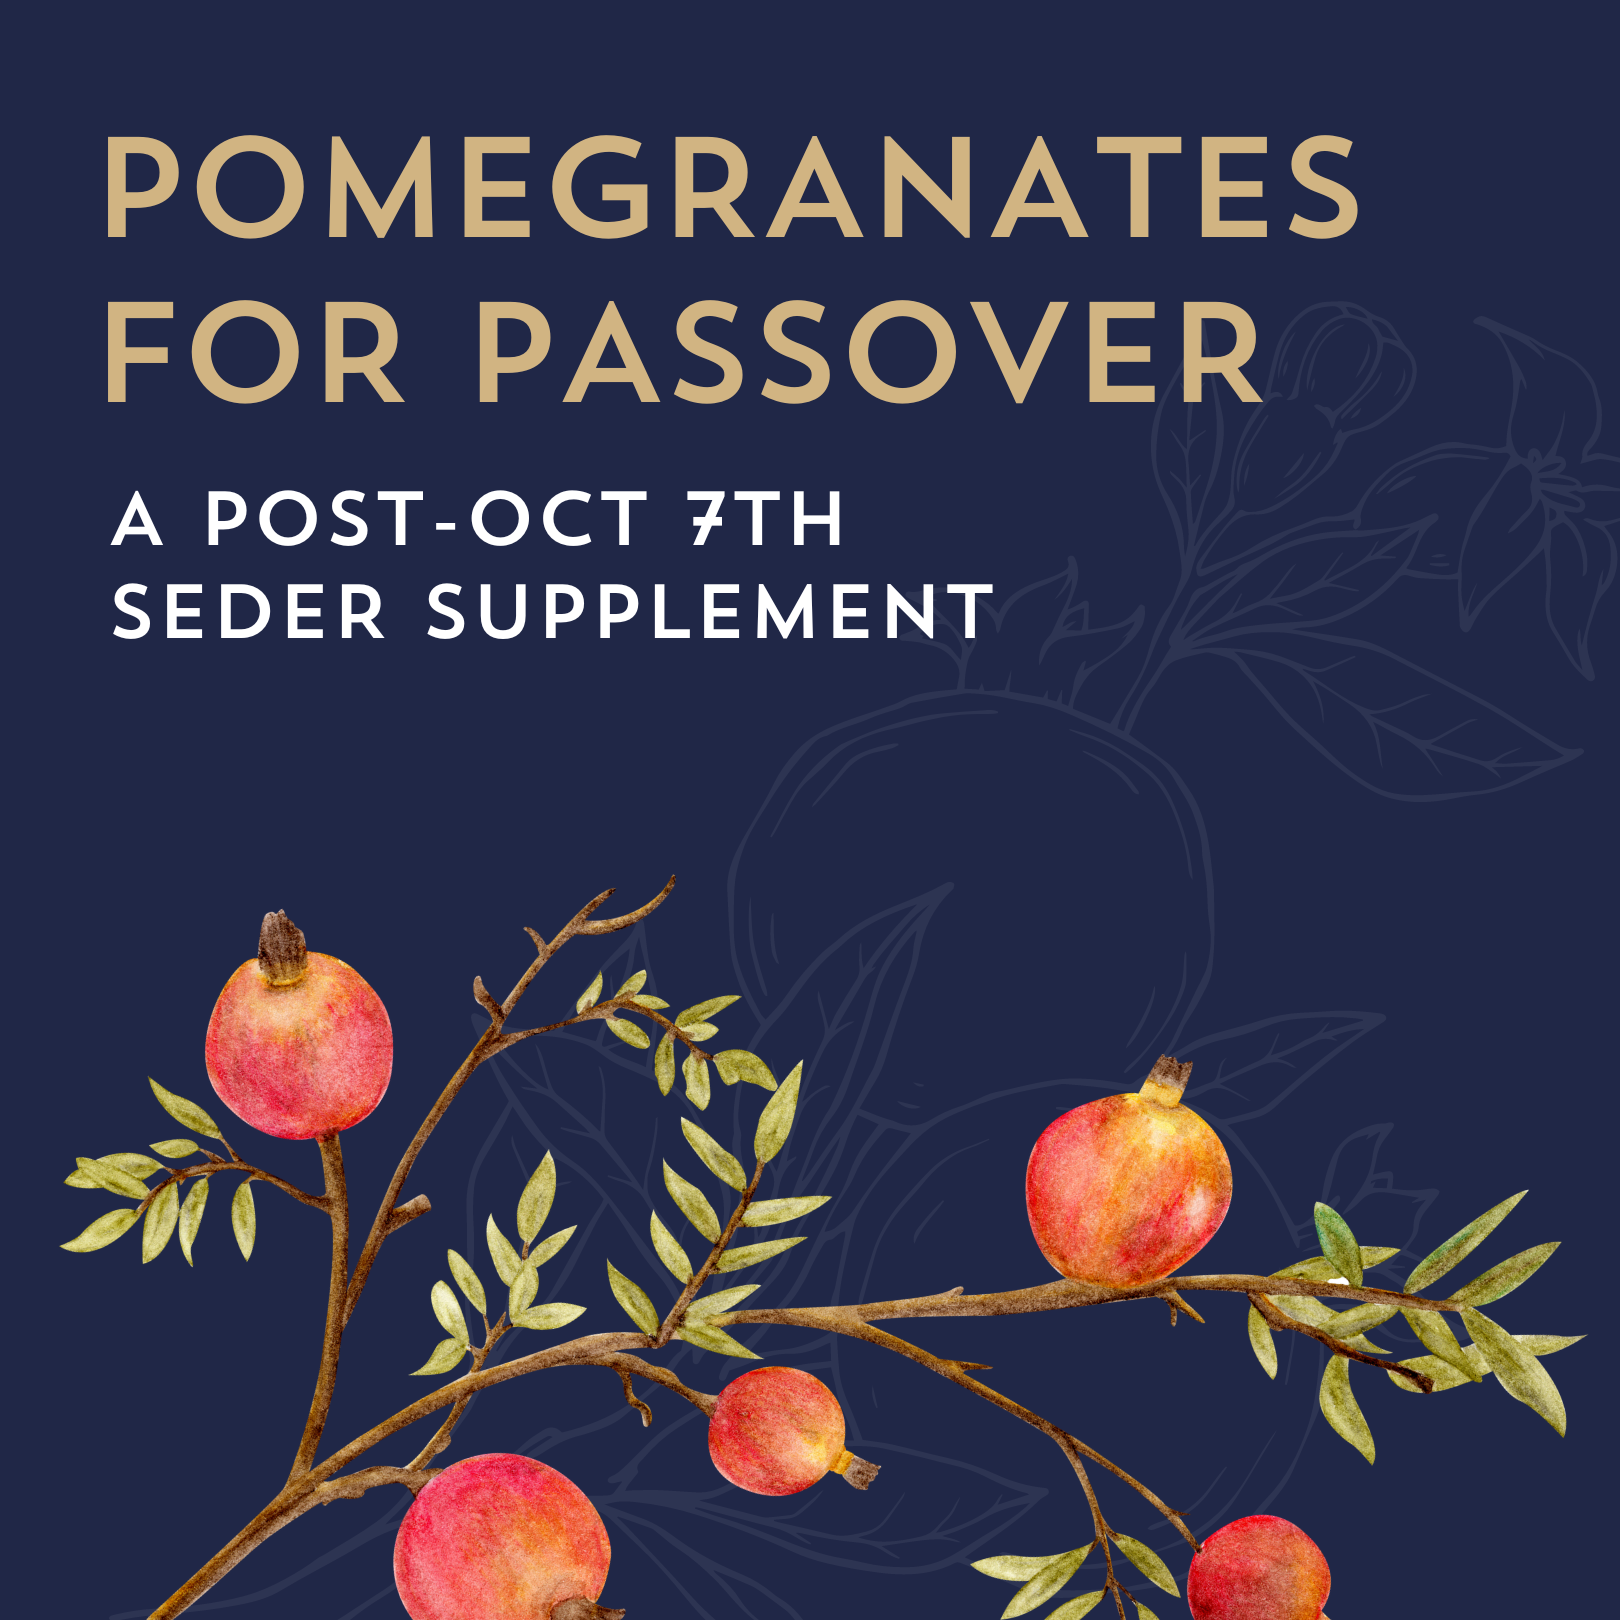 Pomegranates for Passover - IG Post.png__PID:0b9dfedf-f05c-49d1-80a2-e7f18e111eac